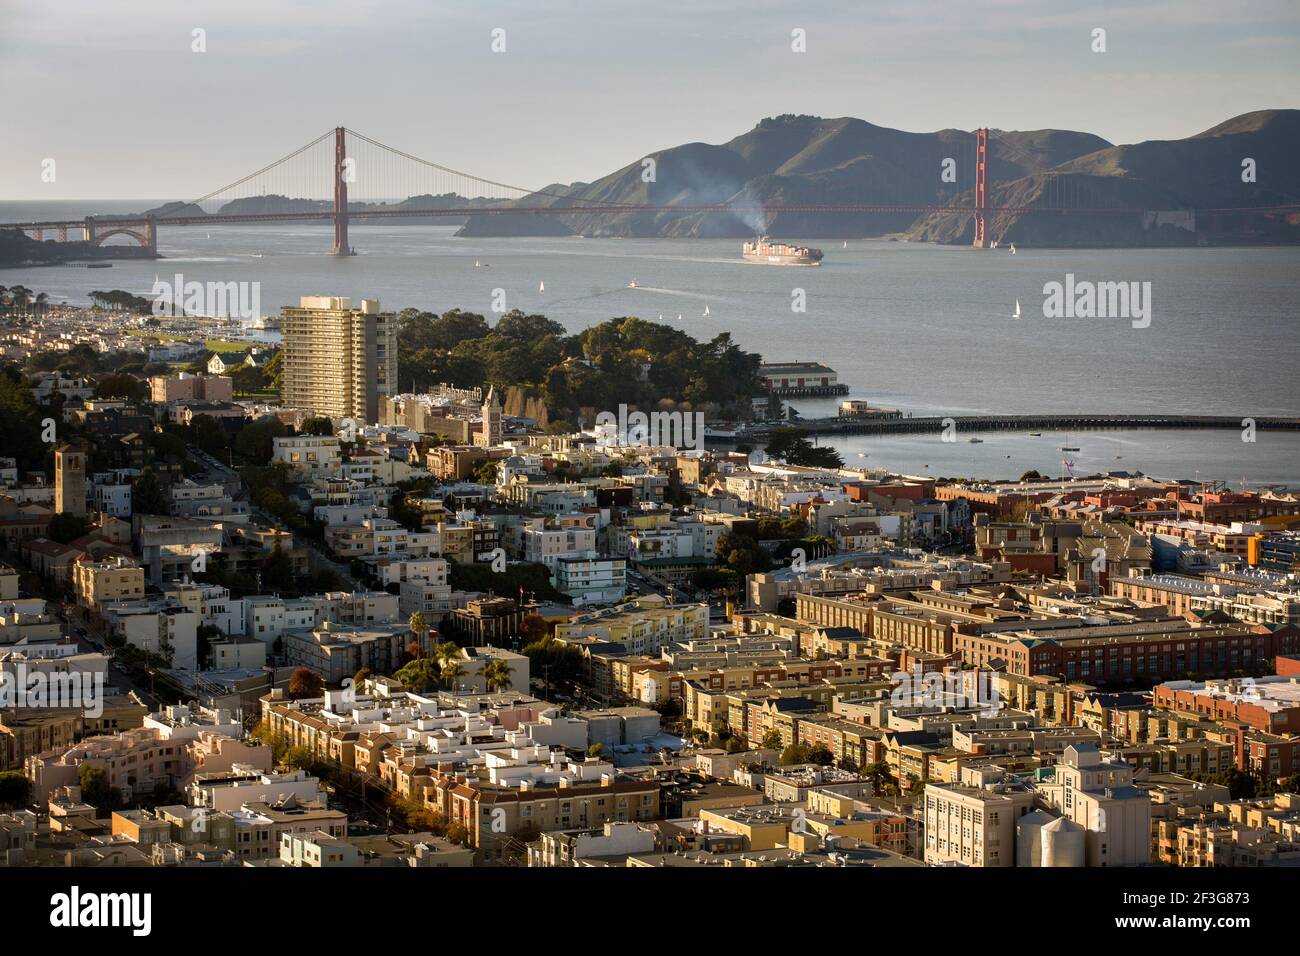 San Francisco city scene with the Golden Gate Bridge in the distance Stock Photo